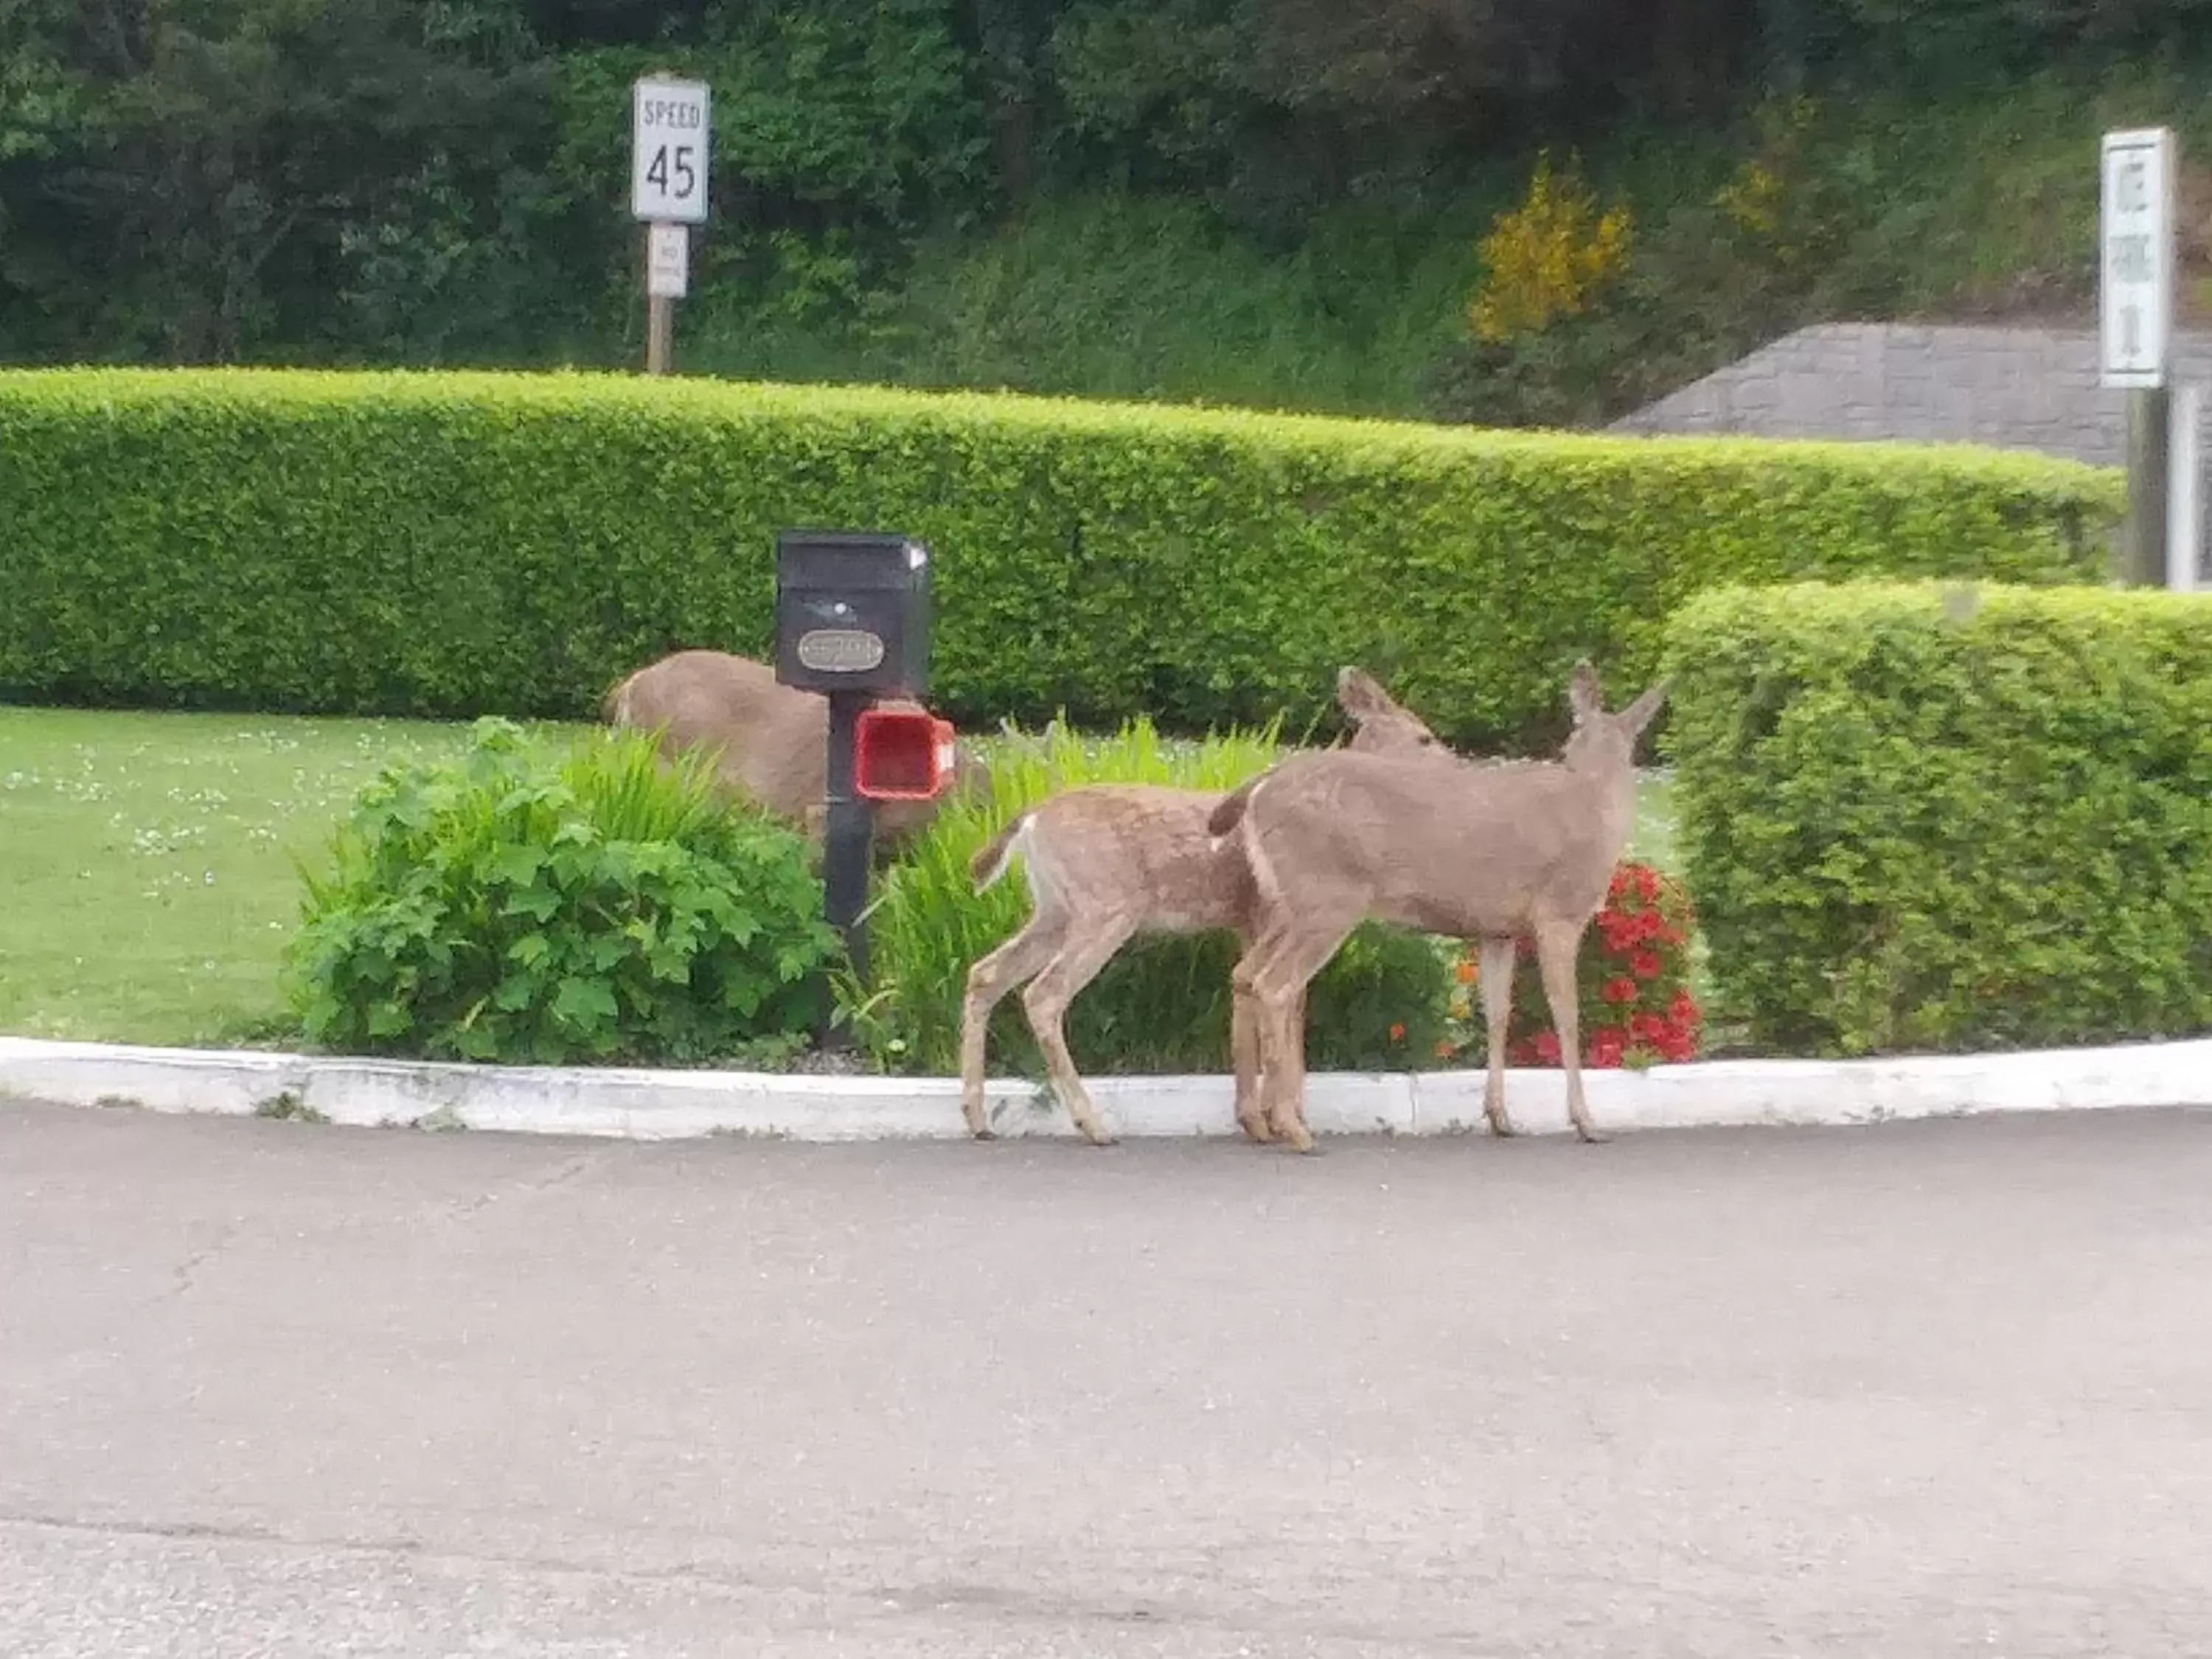 Property building, Other Animals in Bay Bridge Motel